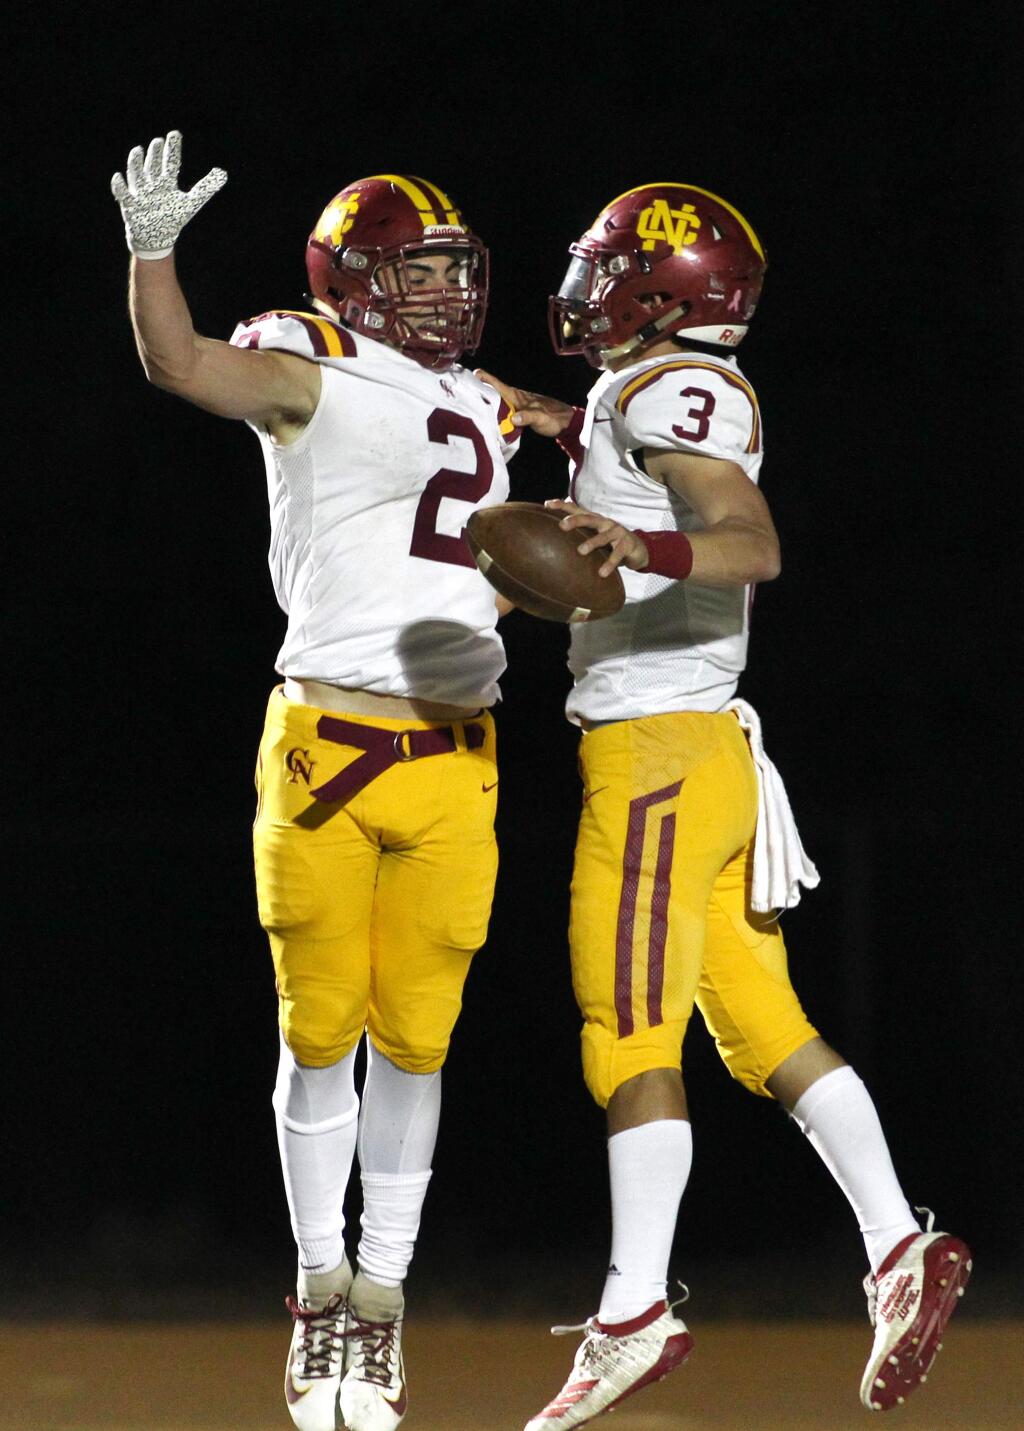 Cardinal Newman's Giancarlo Woods (2) and Jackson Pavitt (3) celebrate a touchdown by Pavitt against Maria Carrillo in Santa Rosa on Monday, Nov. 4, 2019. (Photo by Darryl Bush / For The Press Democrat)